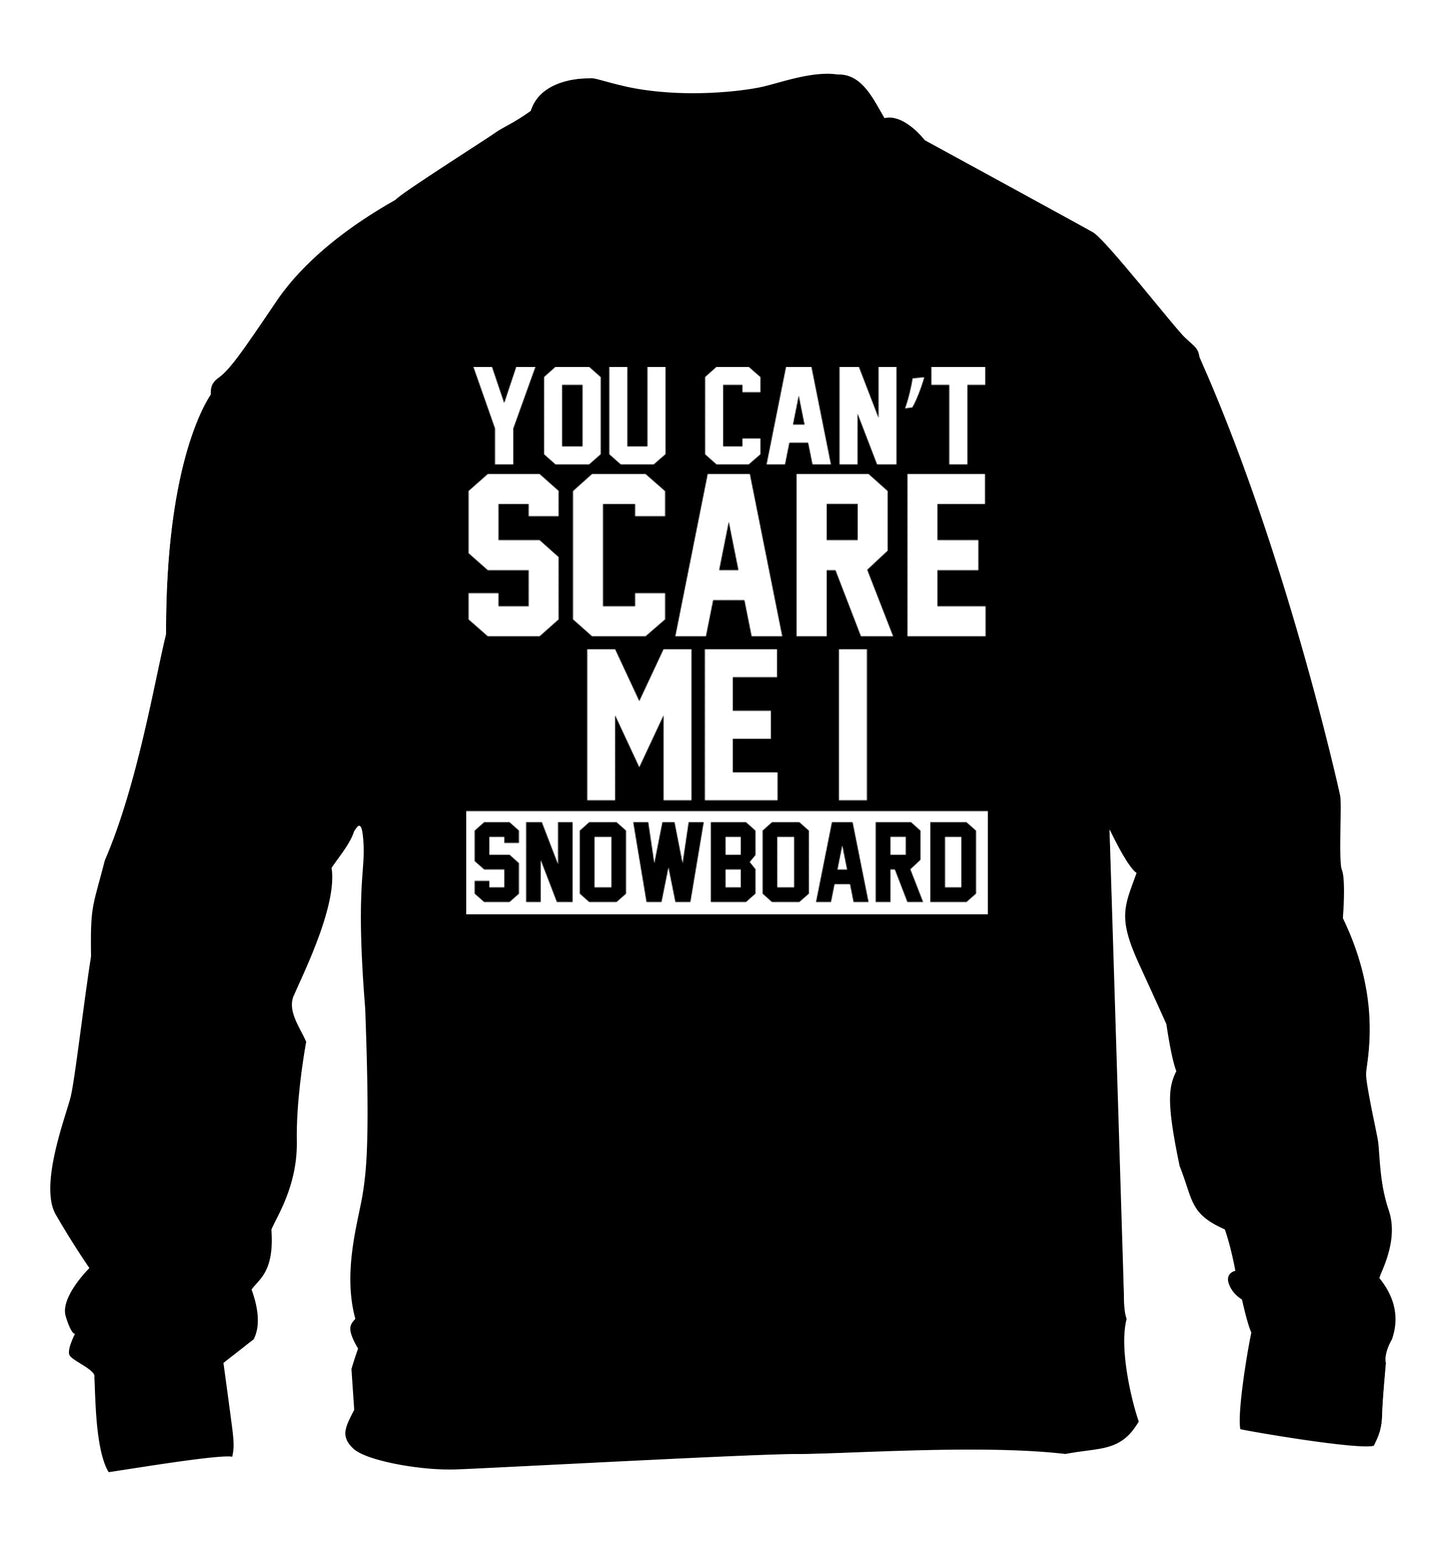 You can't scare me I snowboard children's black sweater 12-14 Years